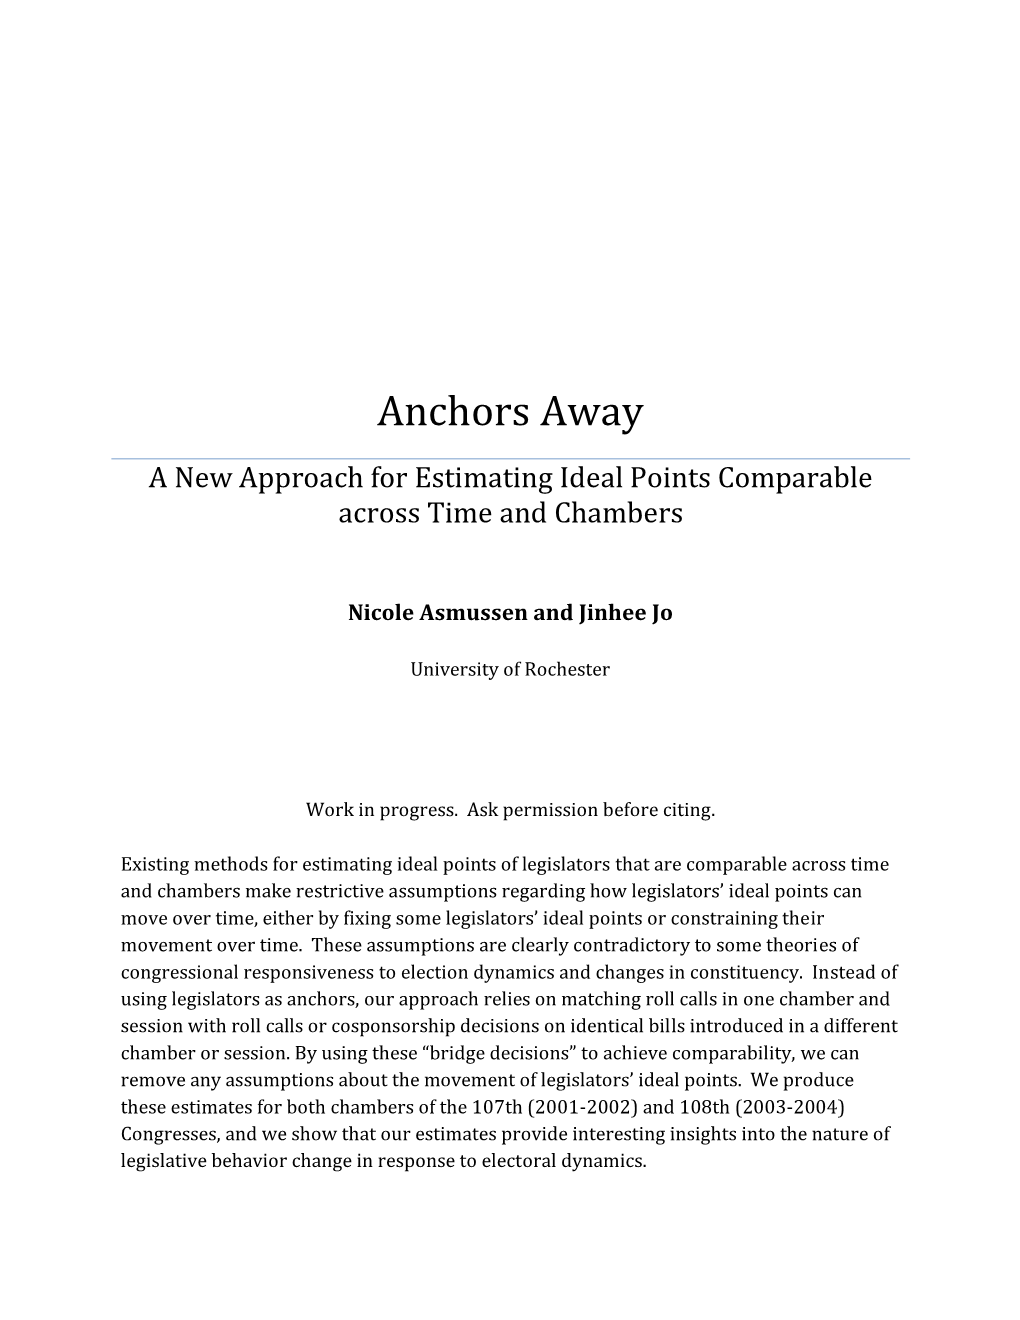 Anchors Away a New Approach for Estimating Ideal Points Comparable Across Time and Chambers